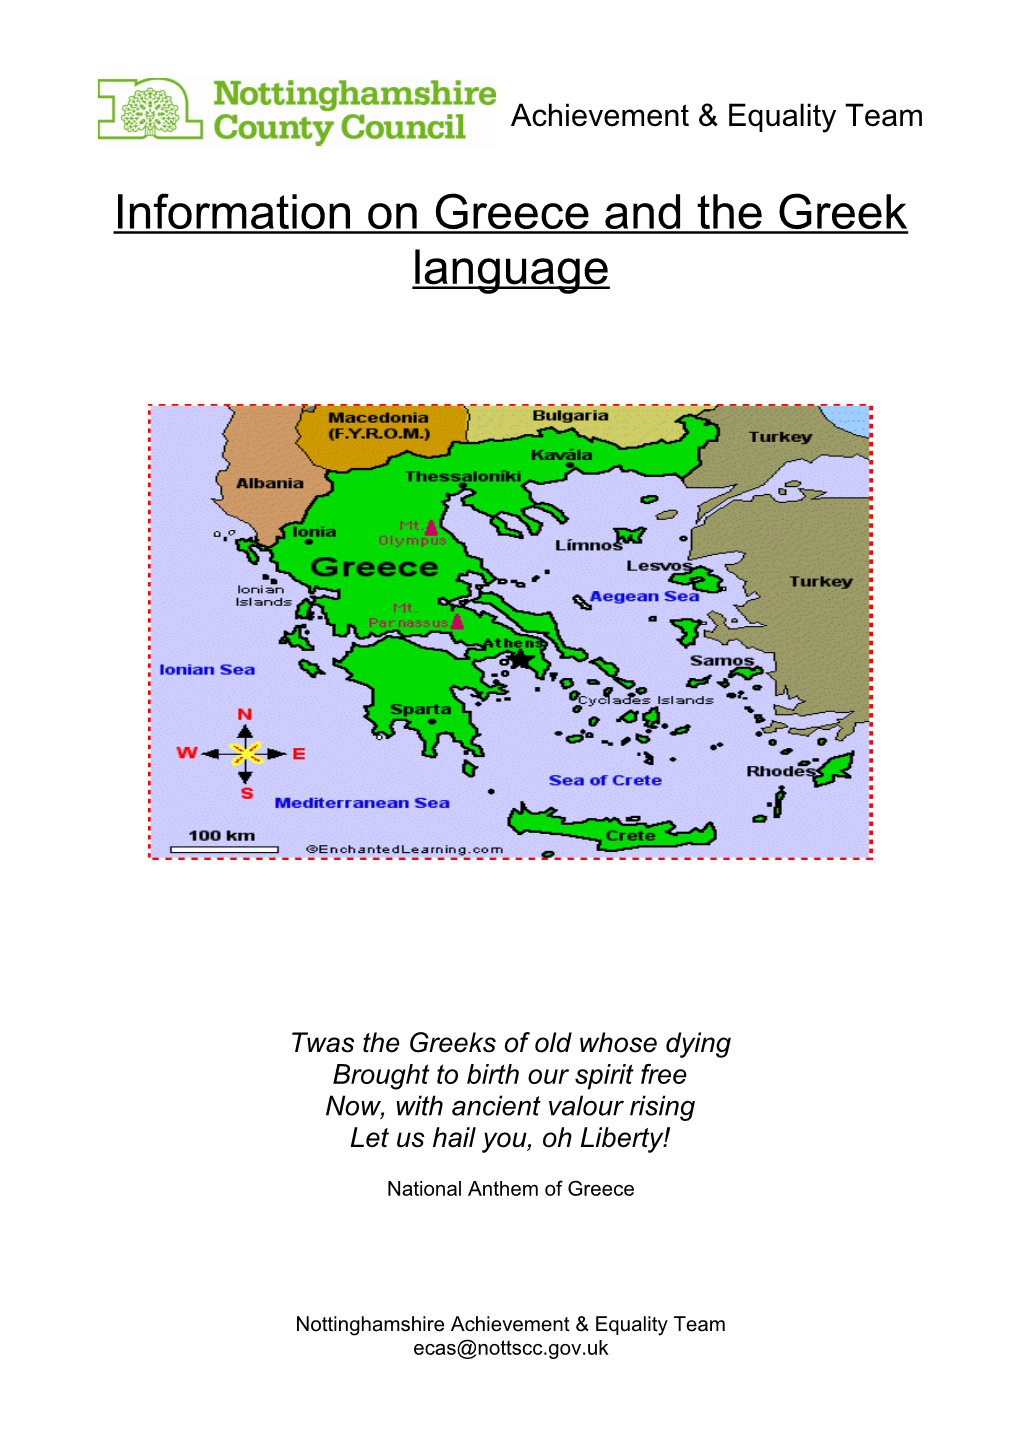 Information on Greece and the Greek Language